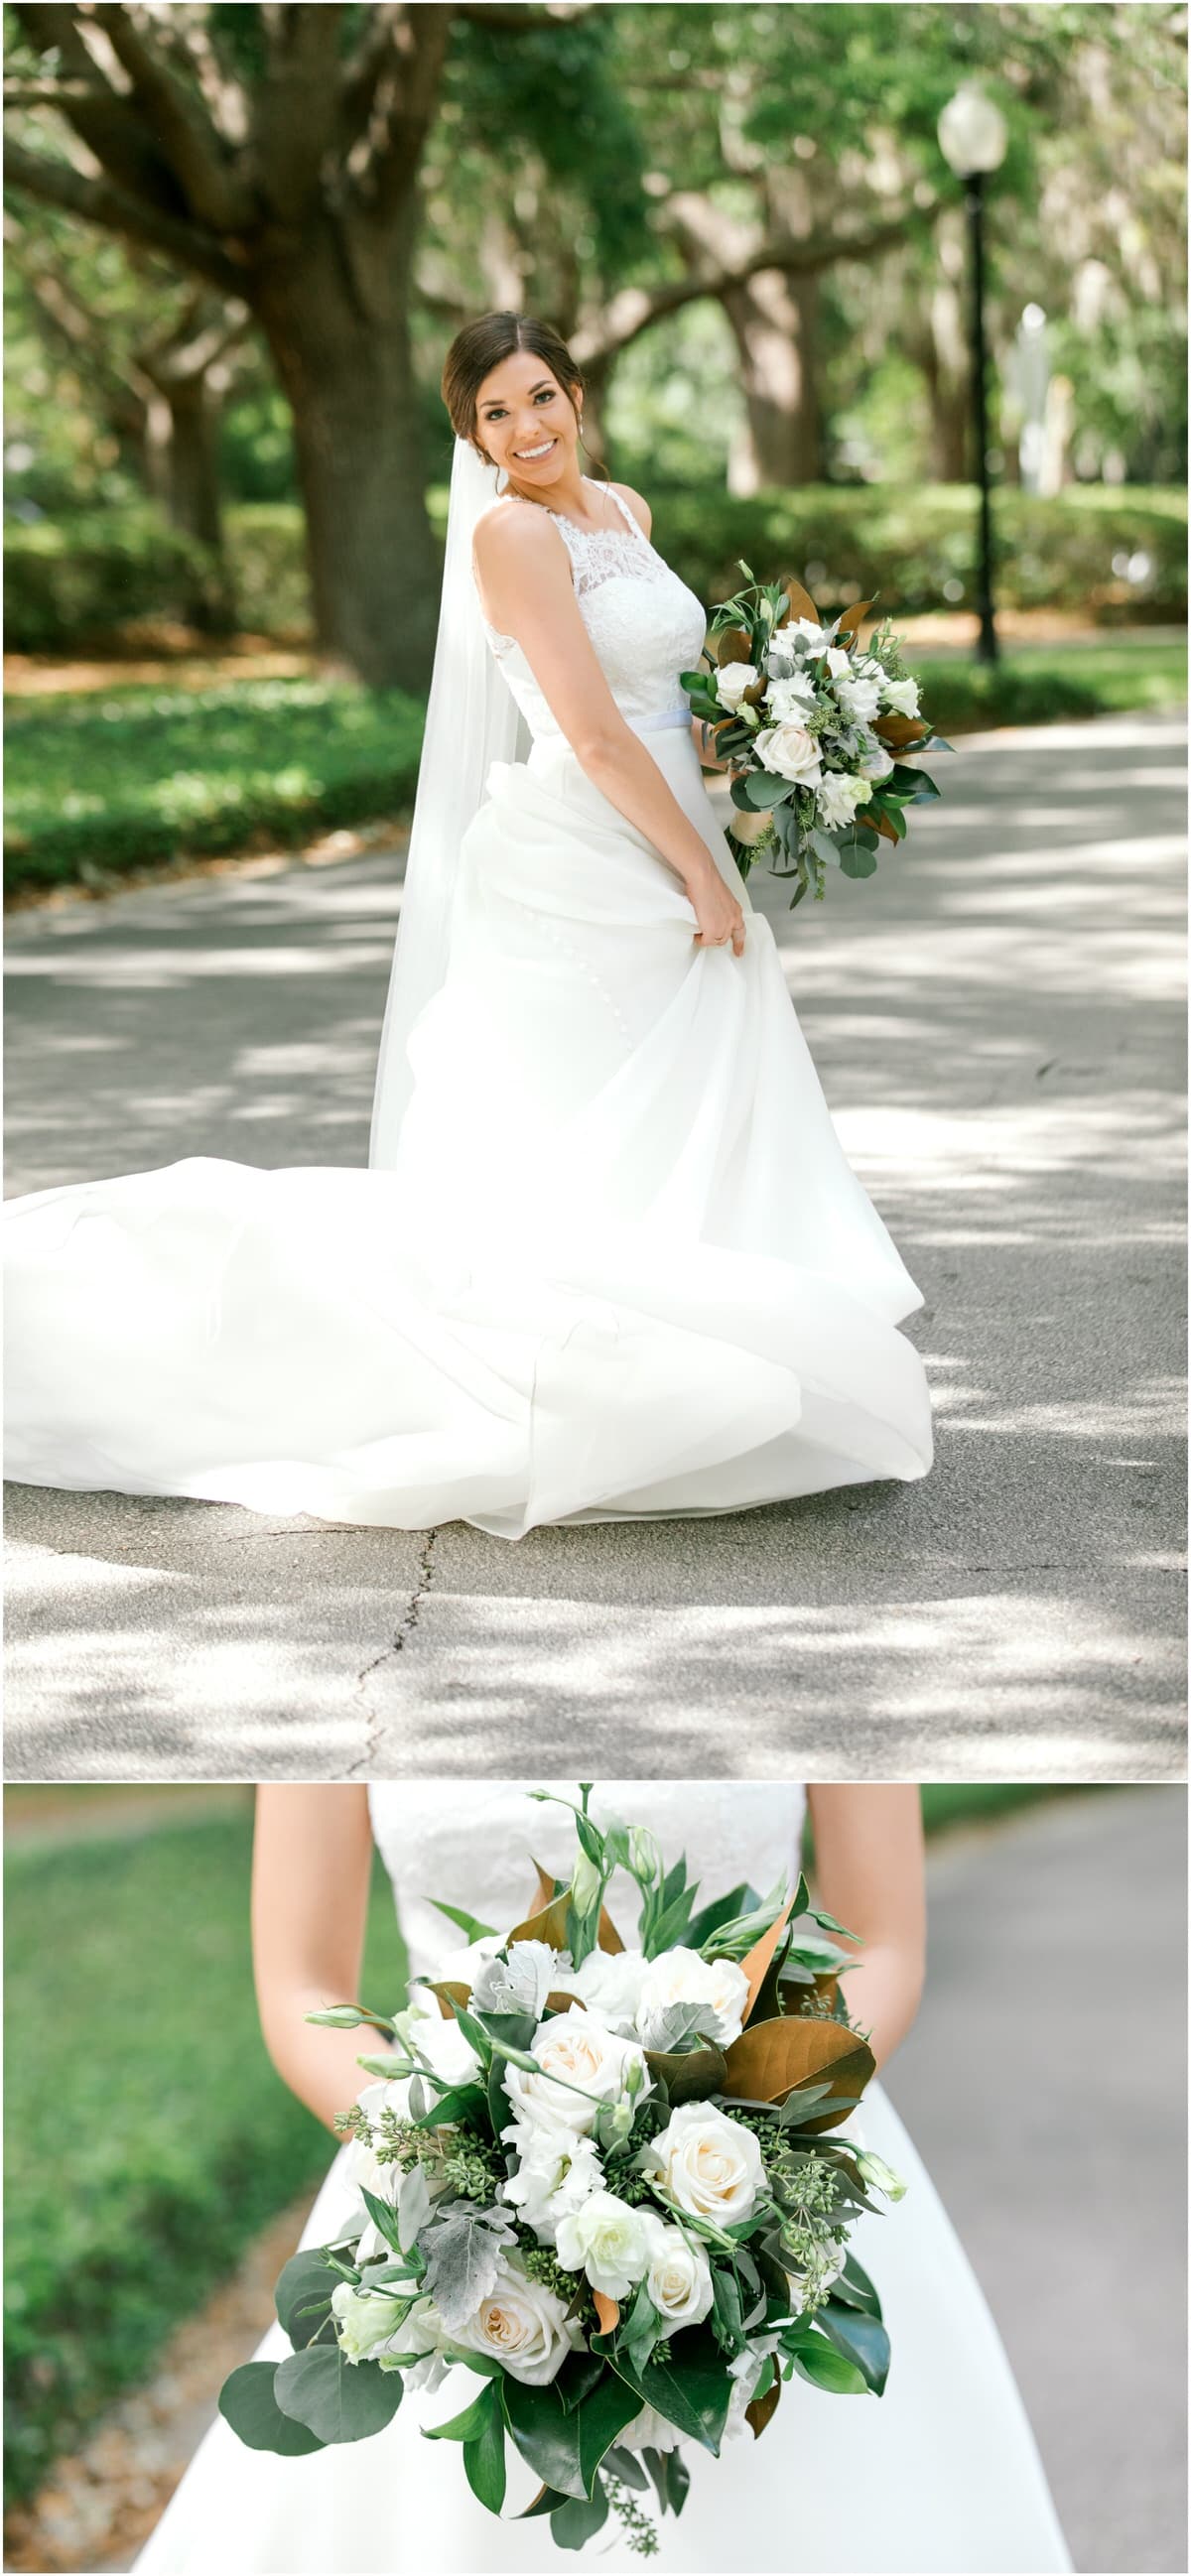 Bride in wedding dress and close up of white and green wedding bouquet